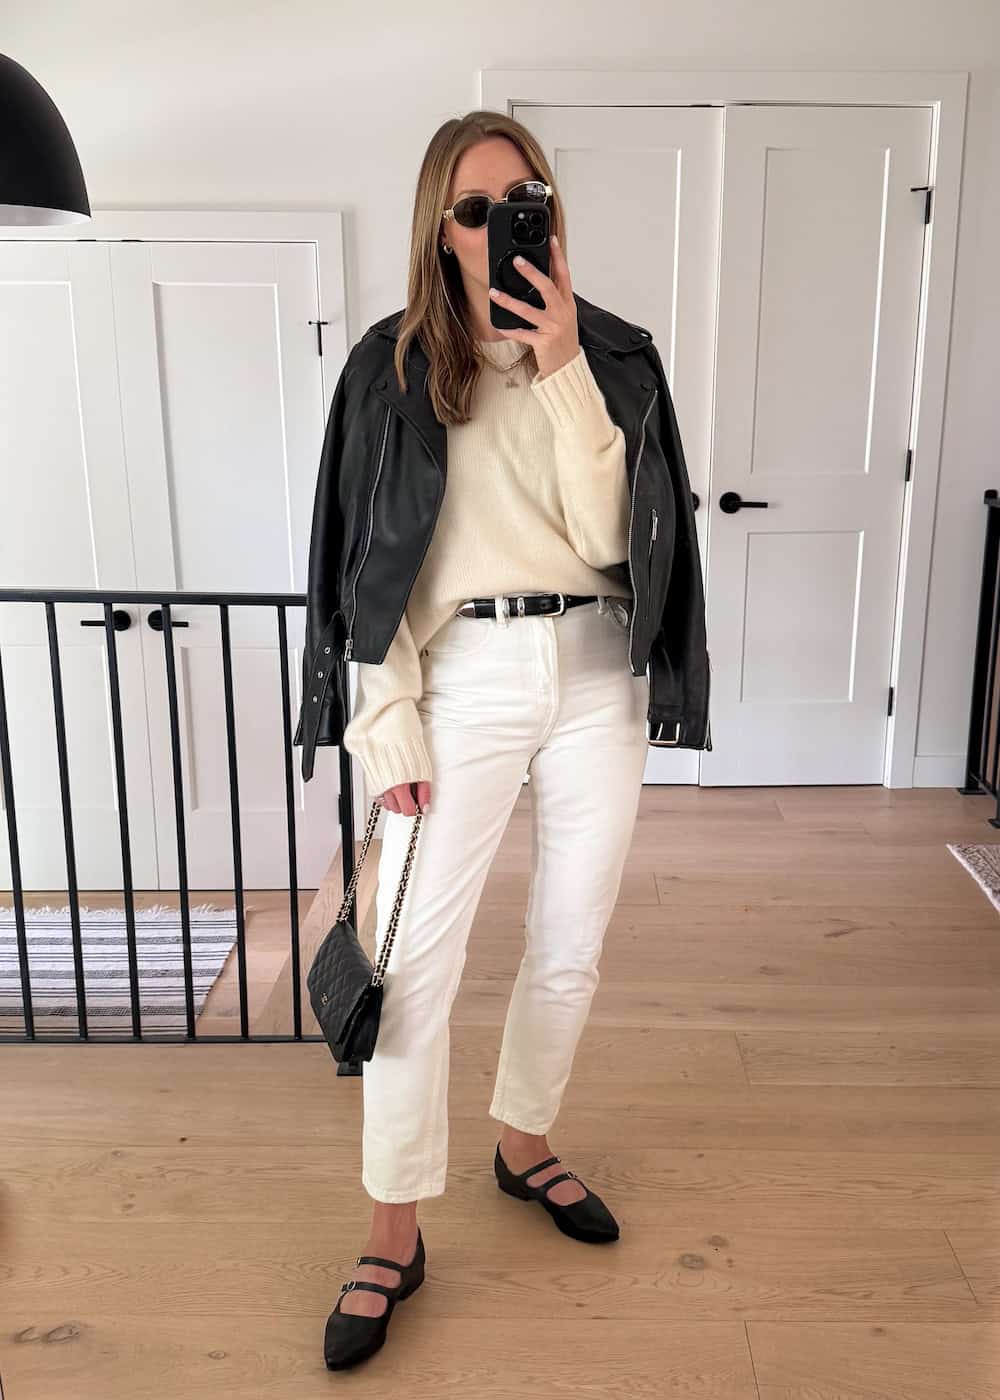 Christal wearing white jeans, a cream sweater and a black leather jacket with black mary jane flats.